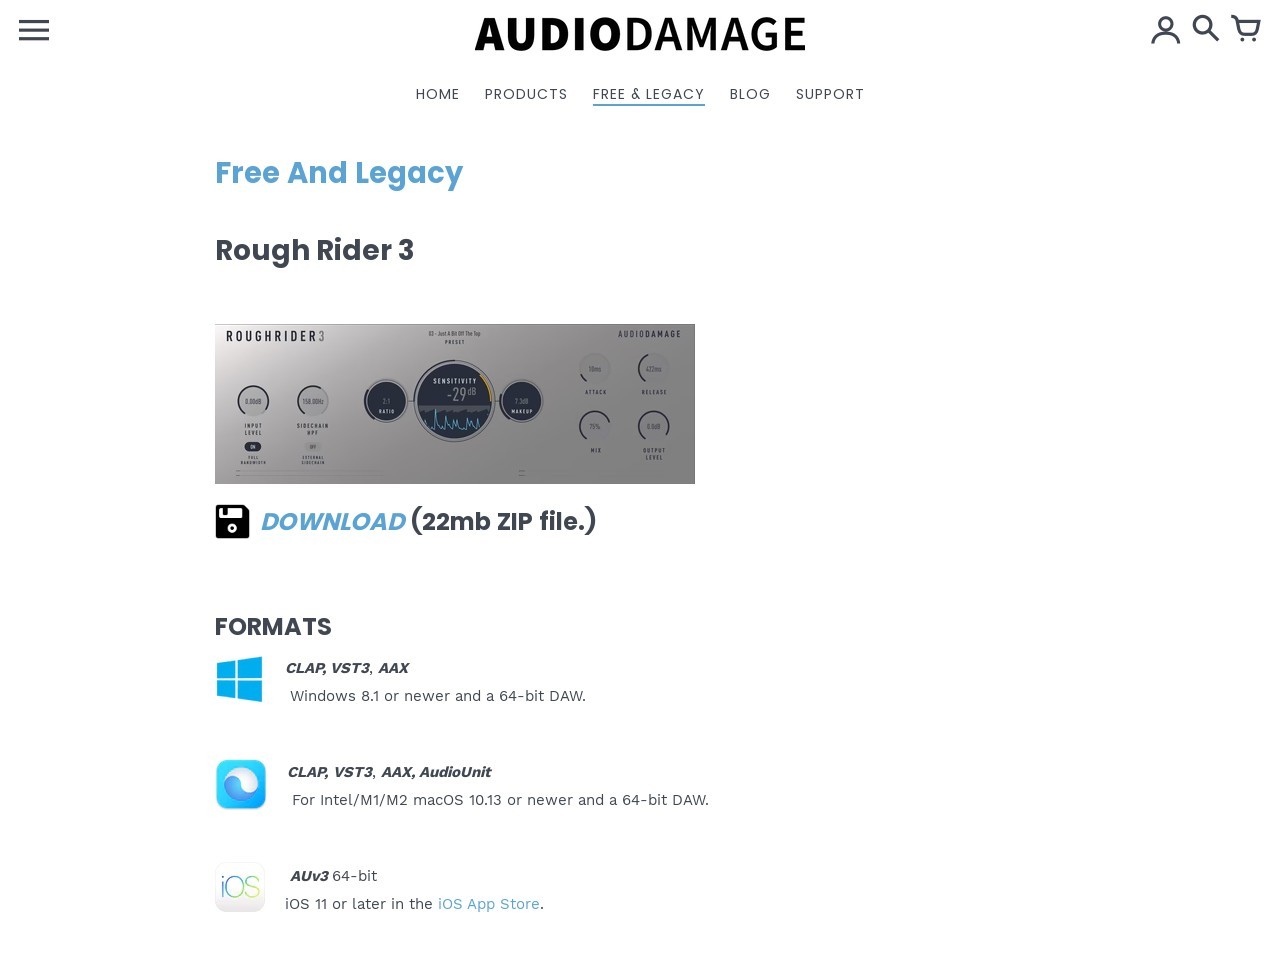 Audio Damage Free And Legacy Products